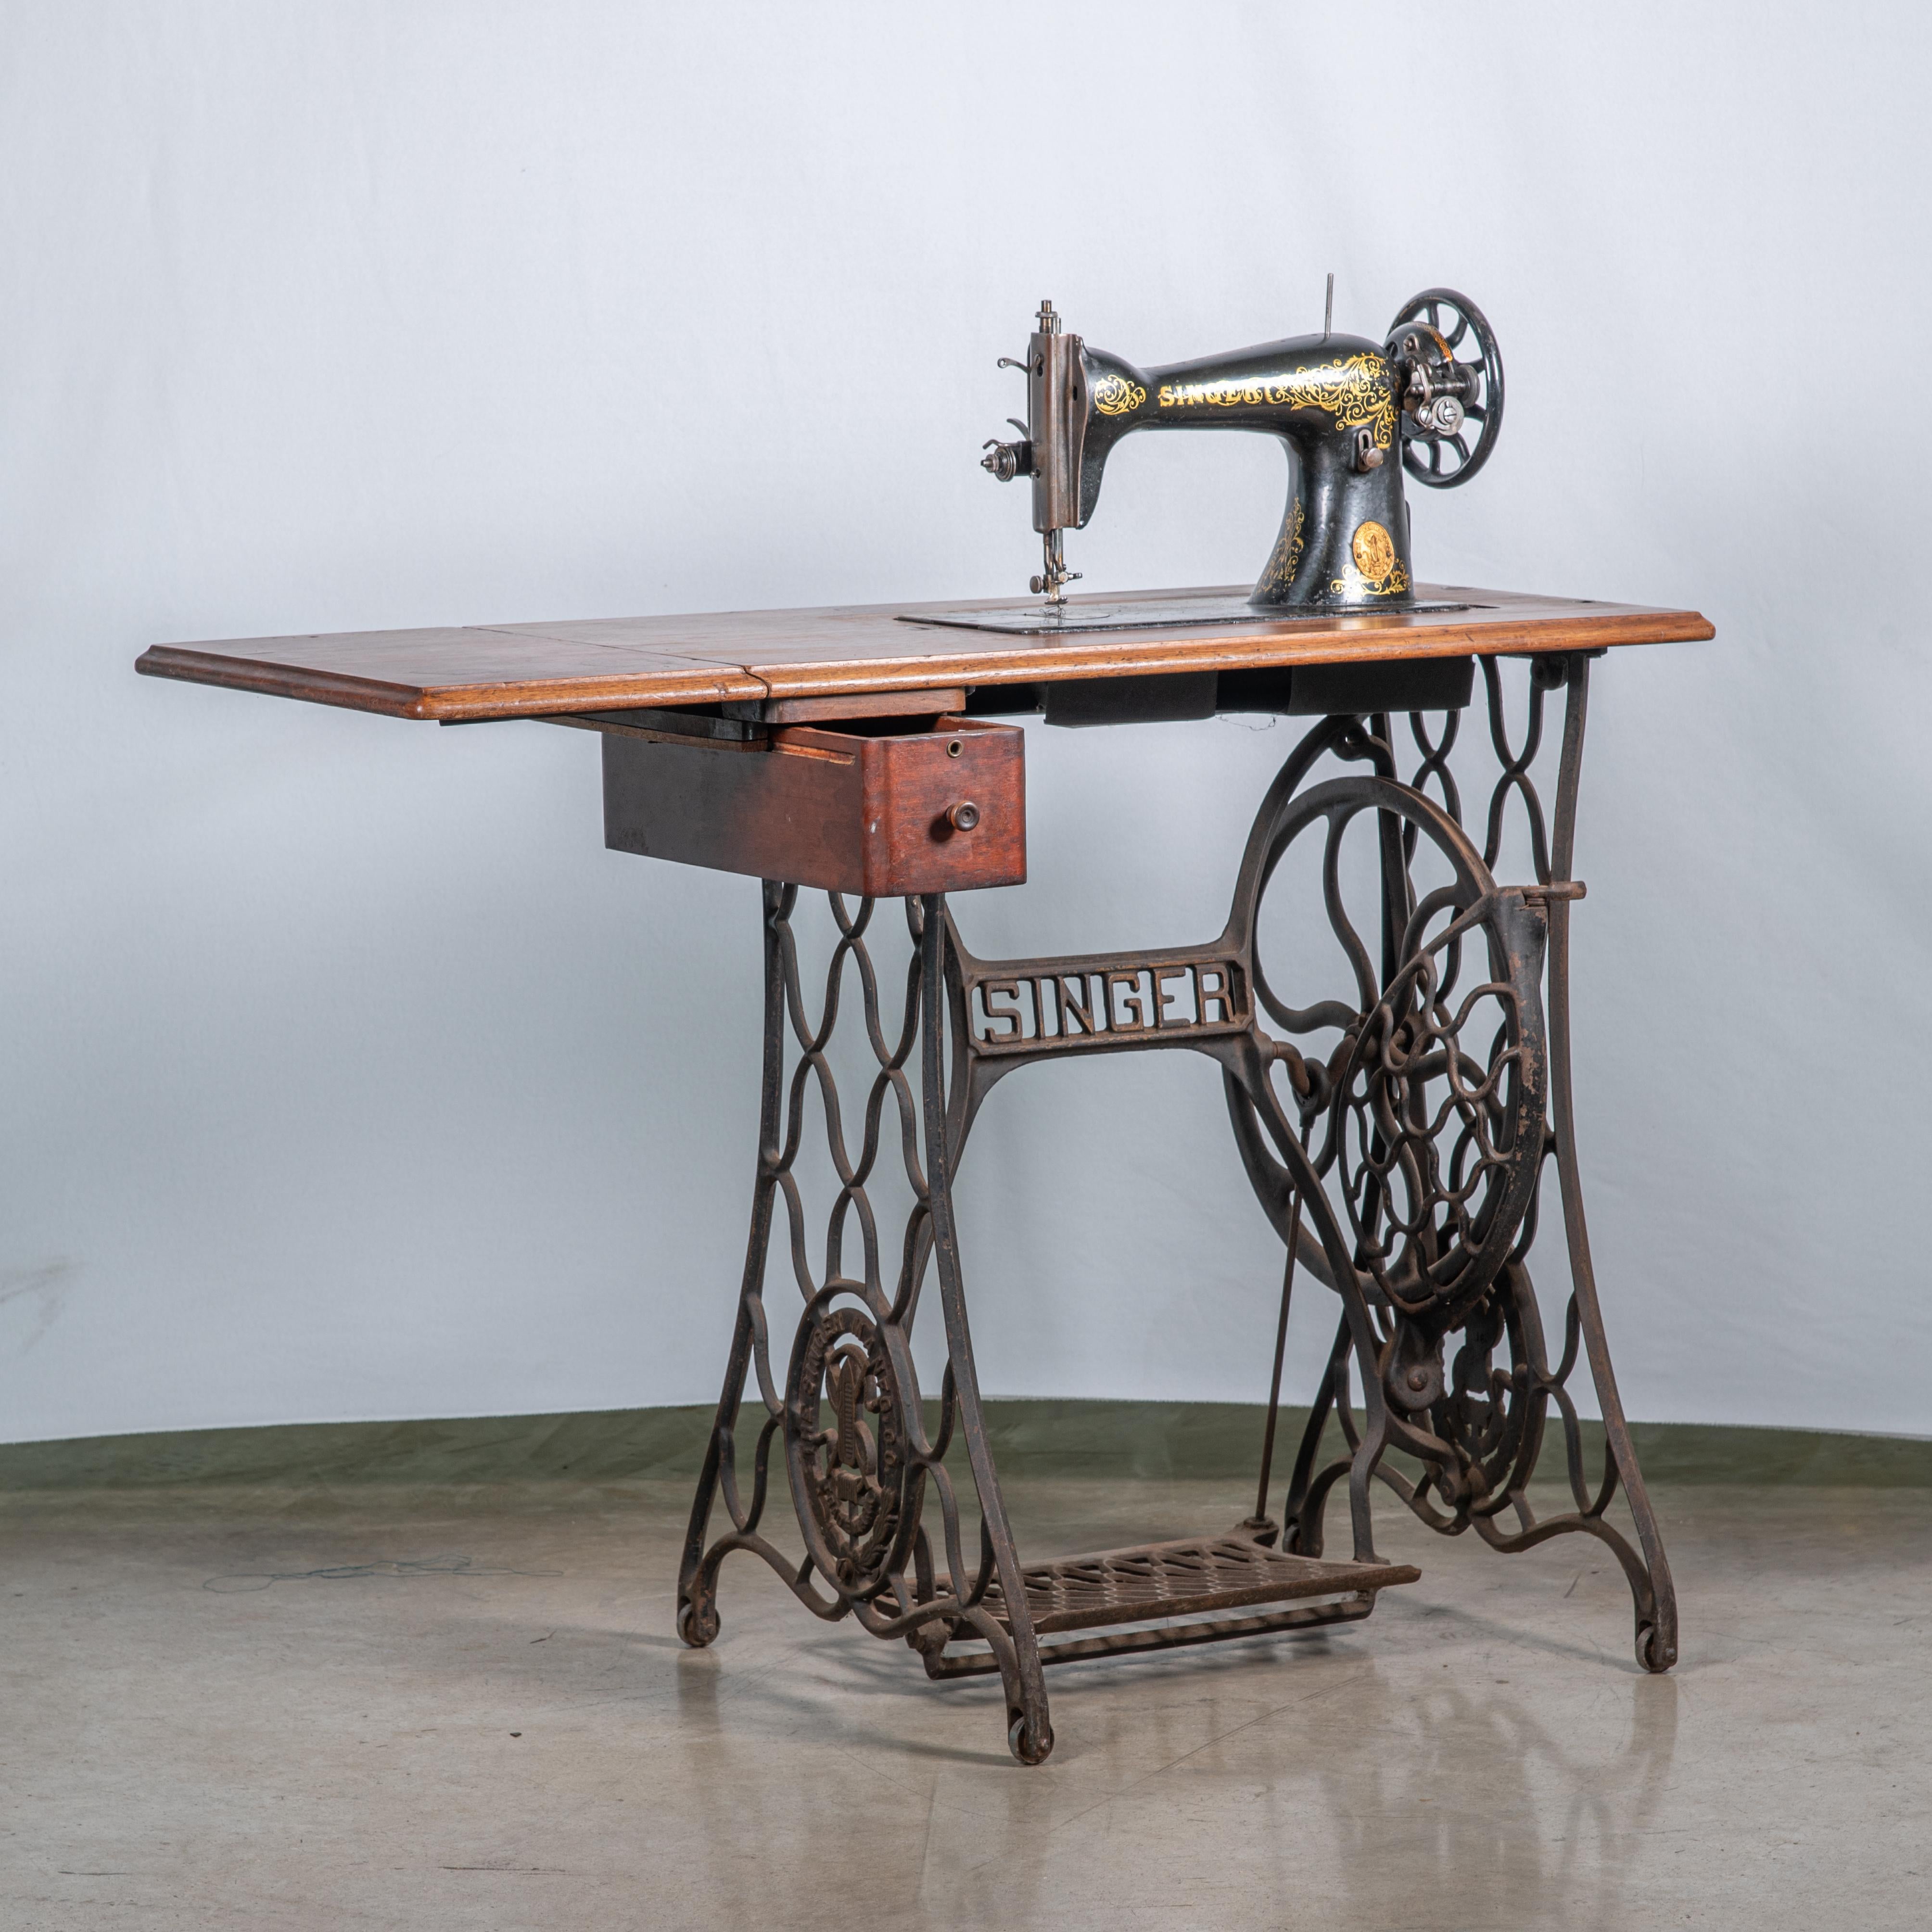 Cast 19th Century Singer Sewing Machine For Sale